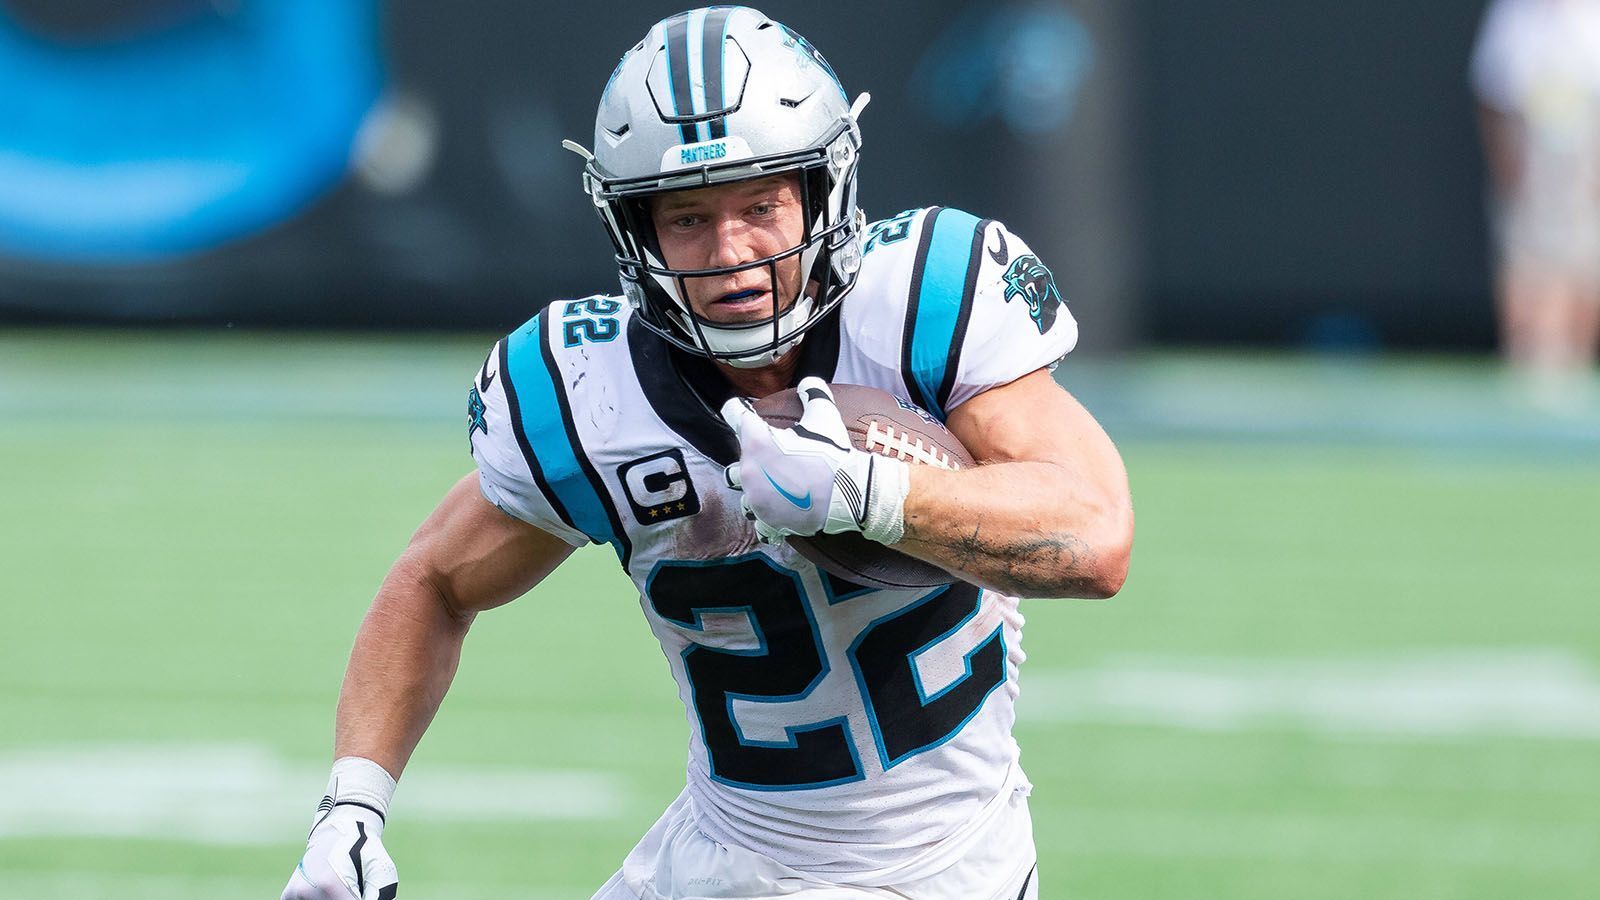 
                <strong>2. Platz (geteilt): Christian McCaffrey</strong><br>
                &#x2022; Team: Carolina Panthers<br>&#x2022; Position: Running Back<br>&#x2022; <strong>Overall Rating: 96</strong><br>&#x2022; Key Stats: Speed 91 - Acceleration 93 - Agility 96<br>
              